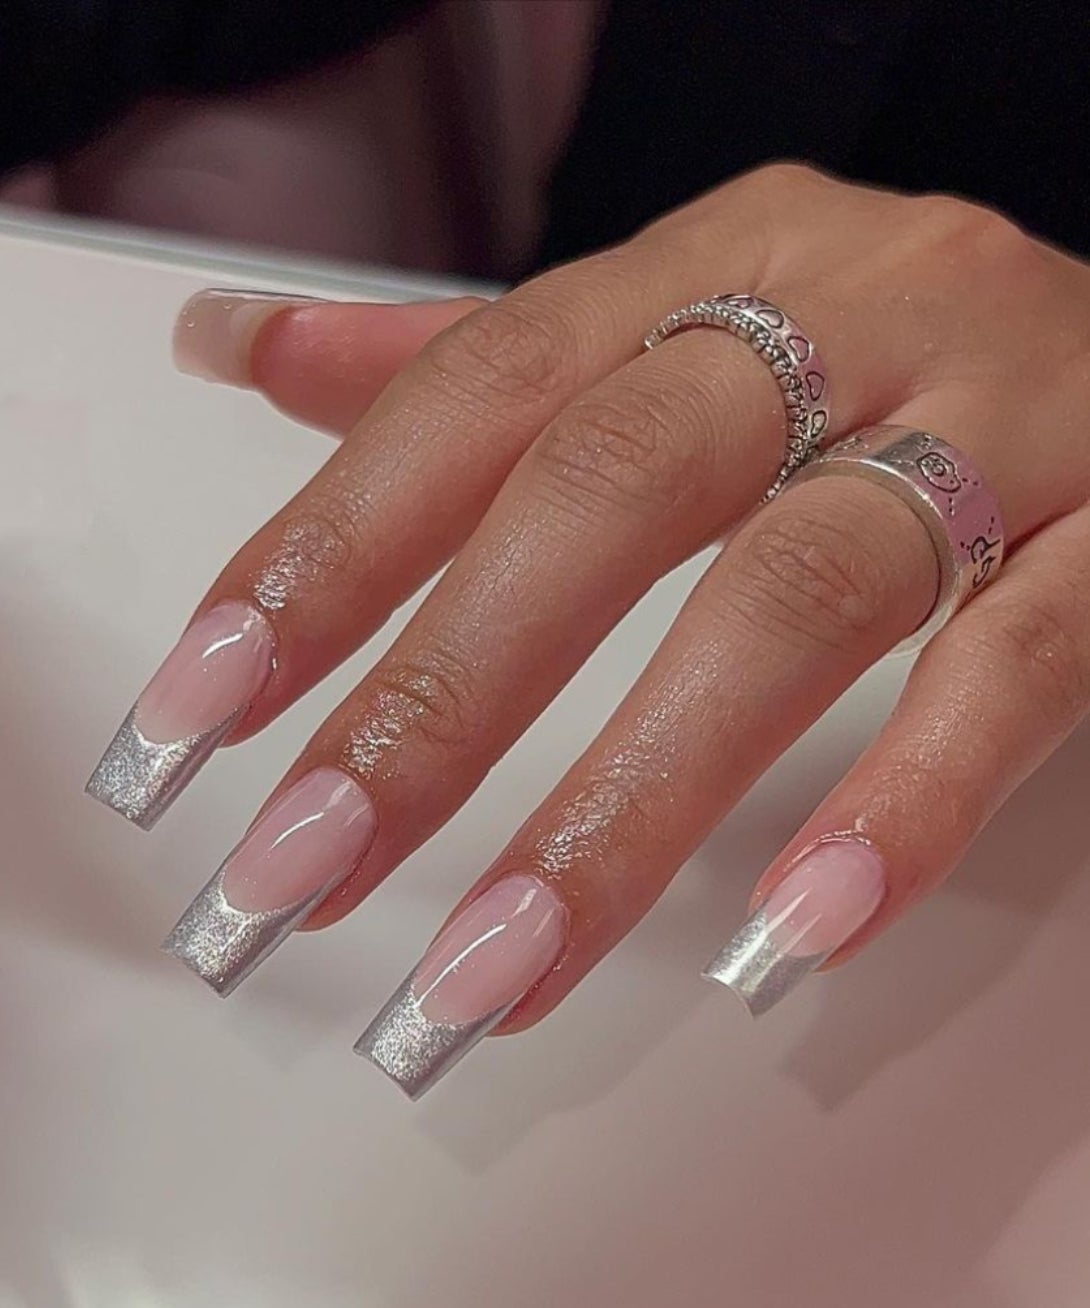 Nail Trends 2023 - The Nail Art Trends To Try As Predicted By An Expert